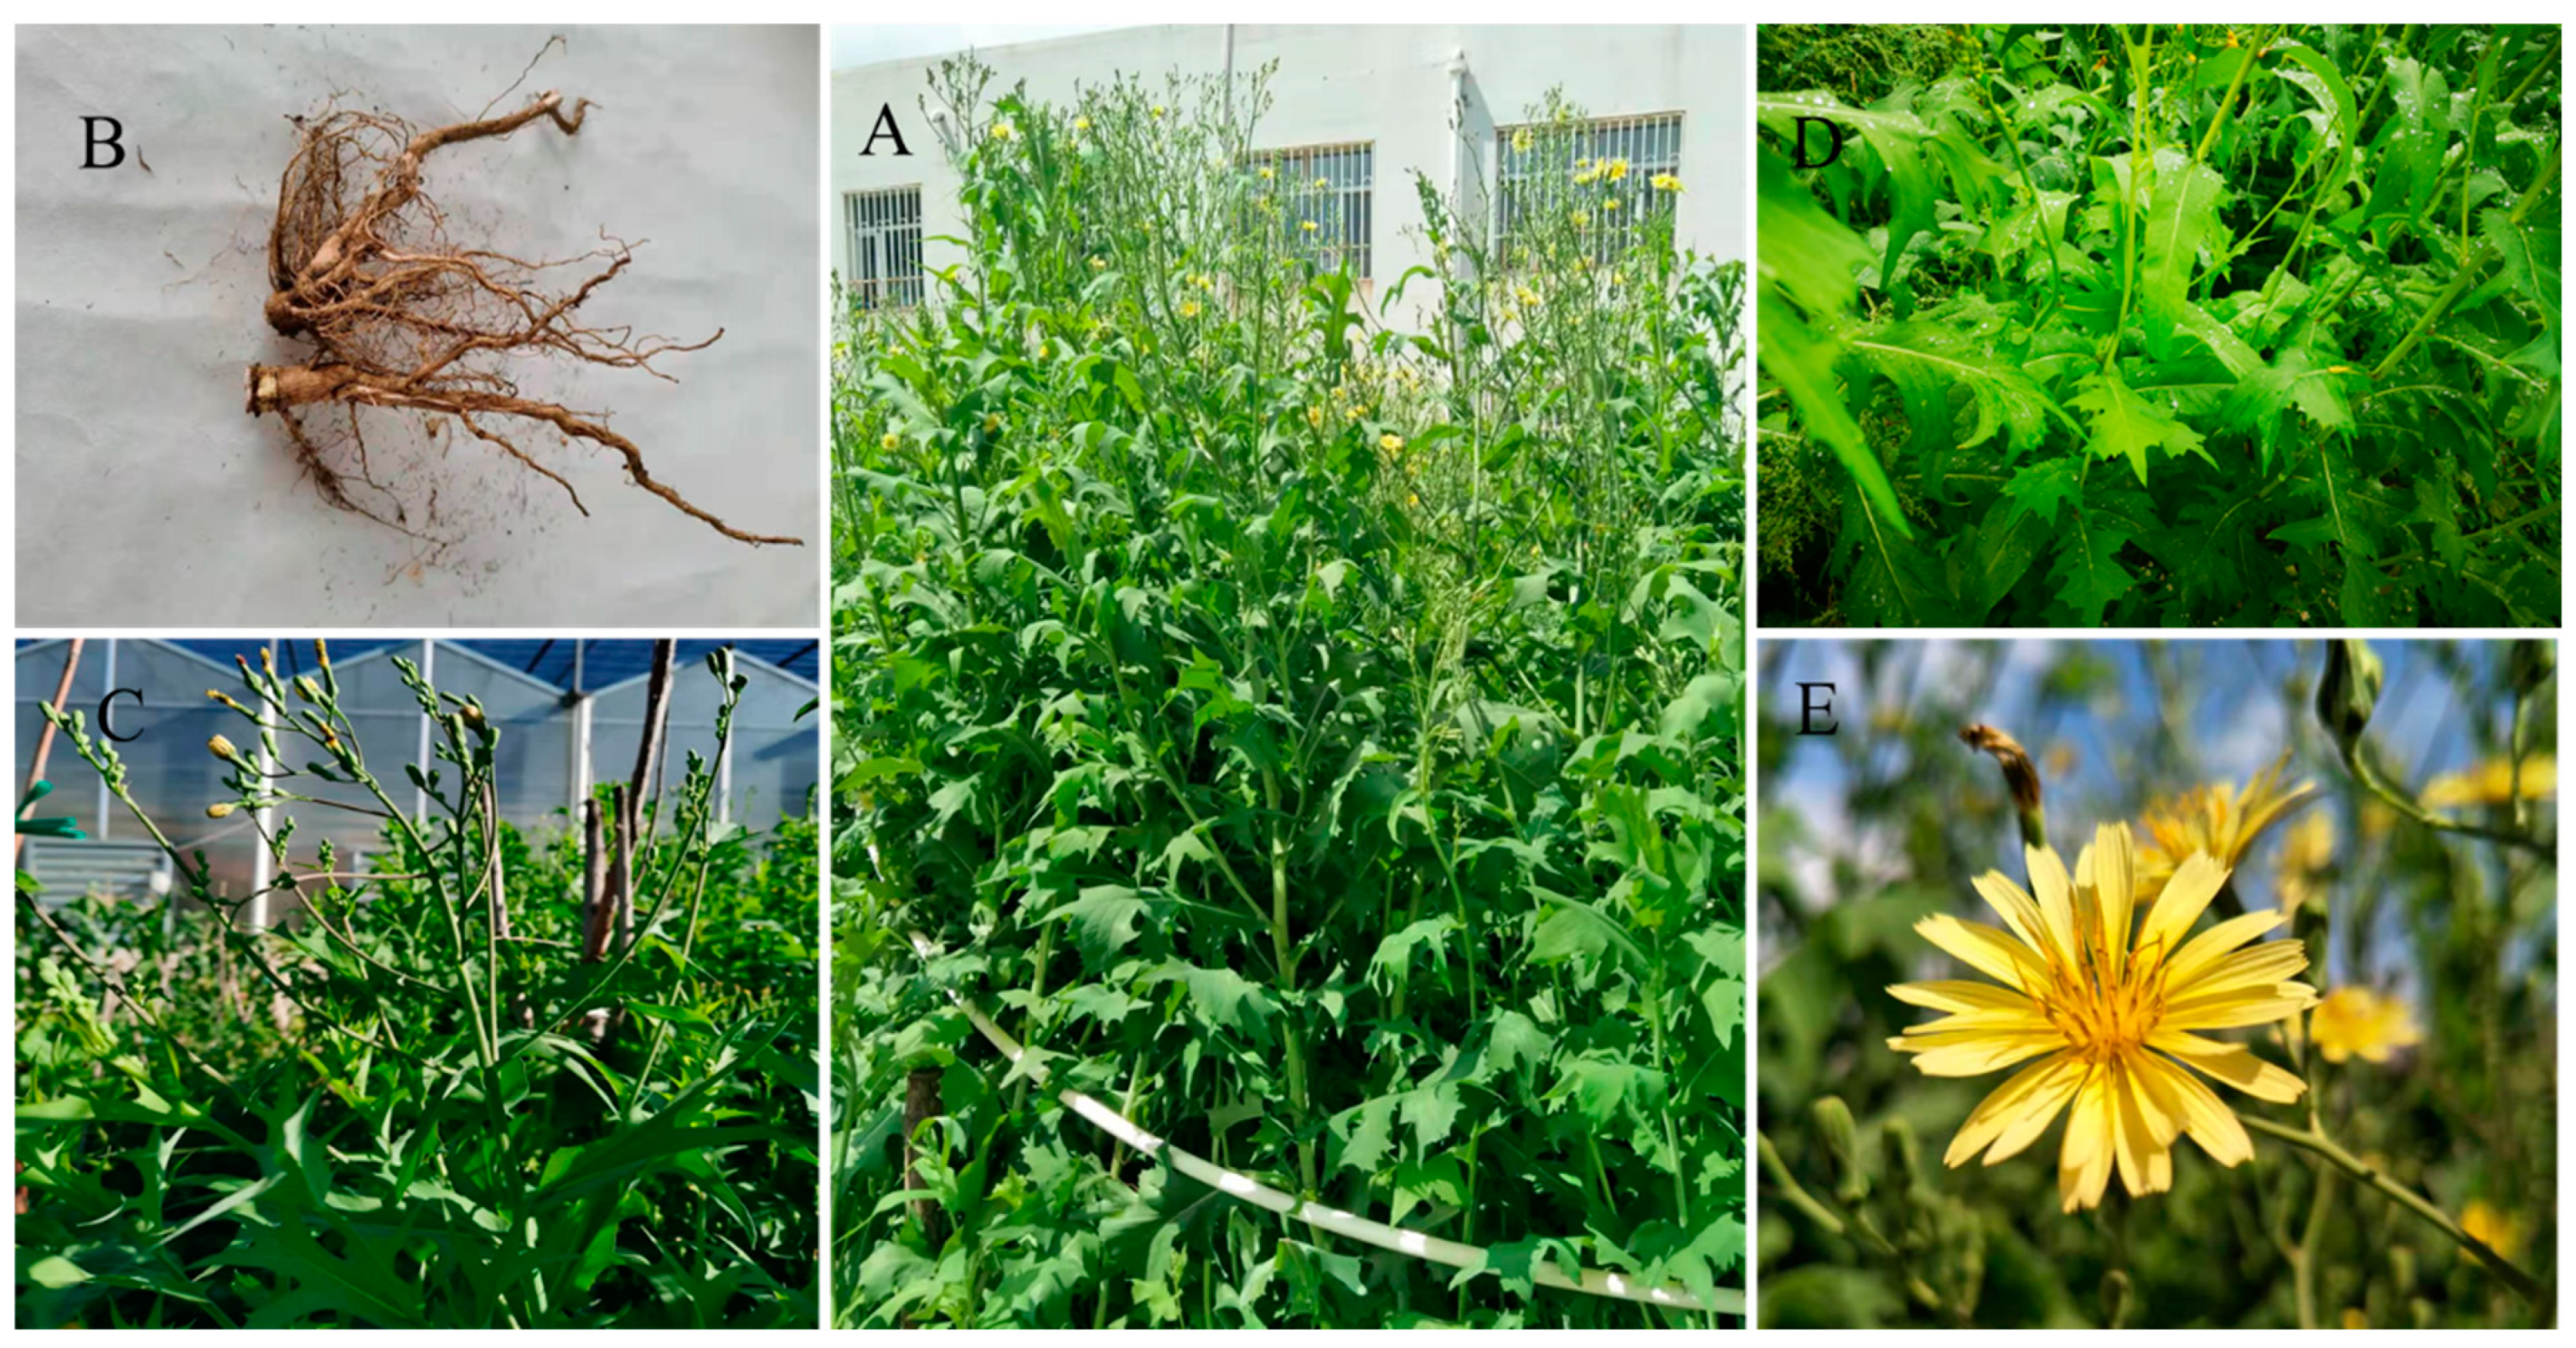 Molecules | Free Full-Text | Comparative Analysis of Major Flavonoids among  Parts of Lactuca indica during Different Growth Periods